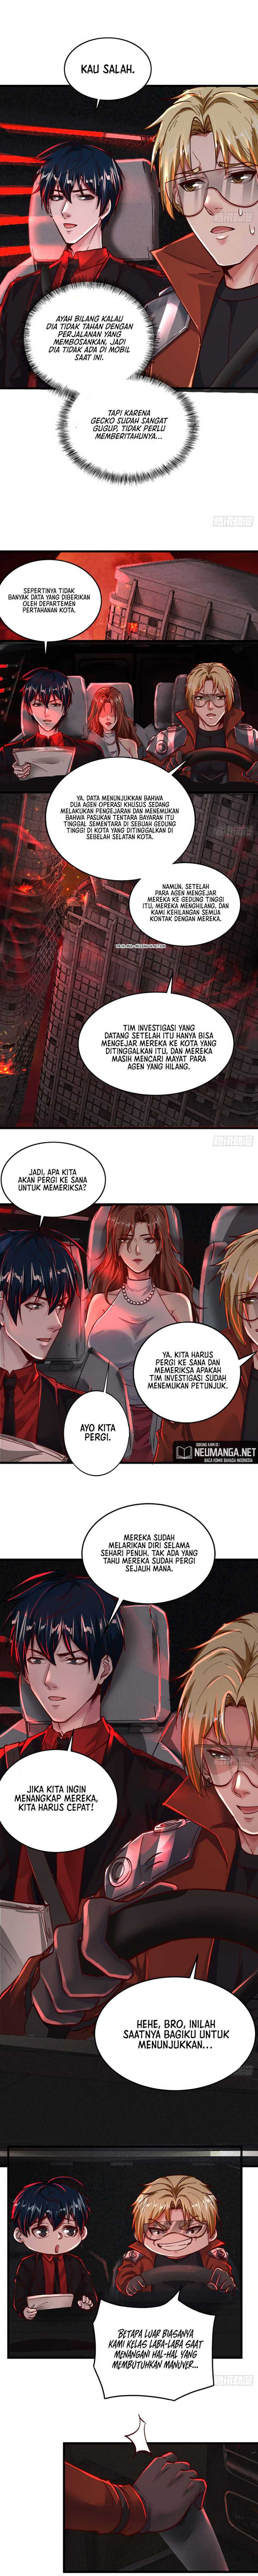 Since The Red Moon Appeared (Hongyue Start) Chapter 57